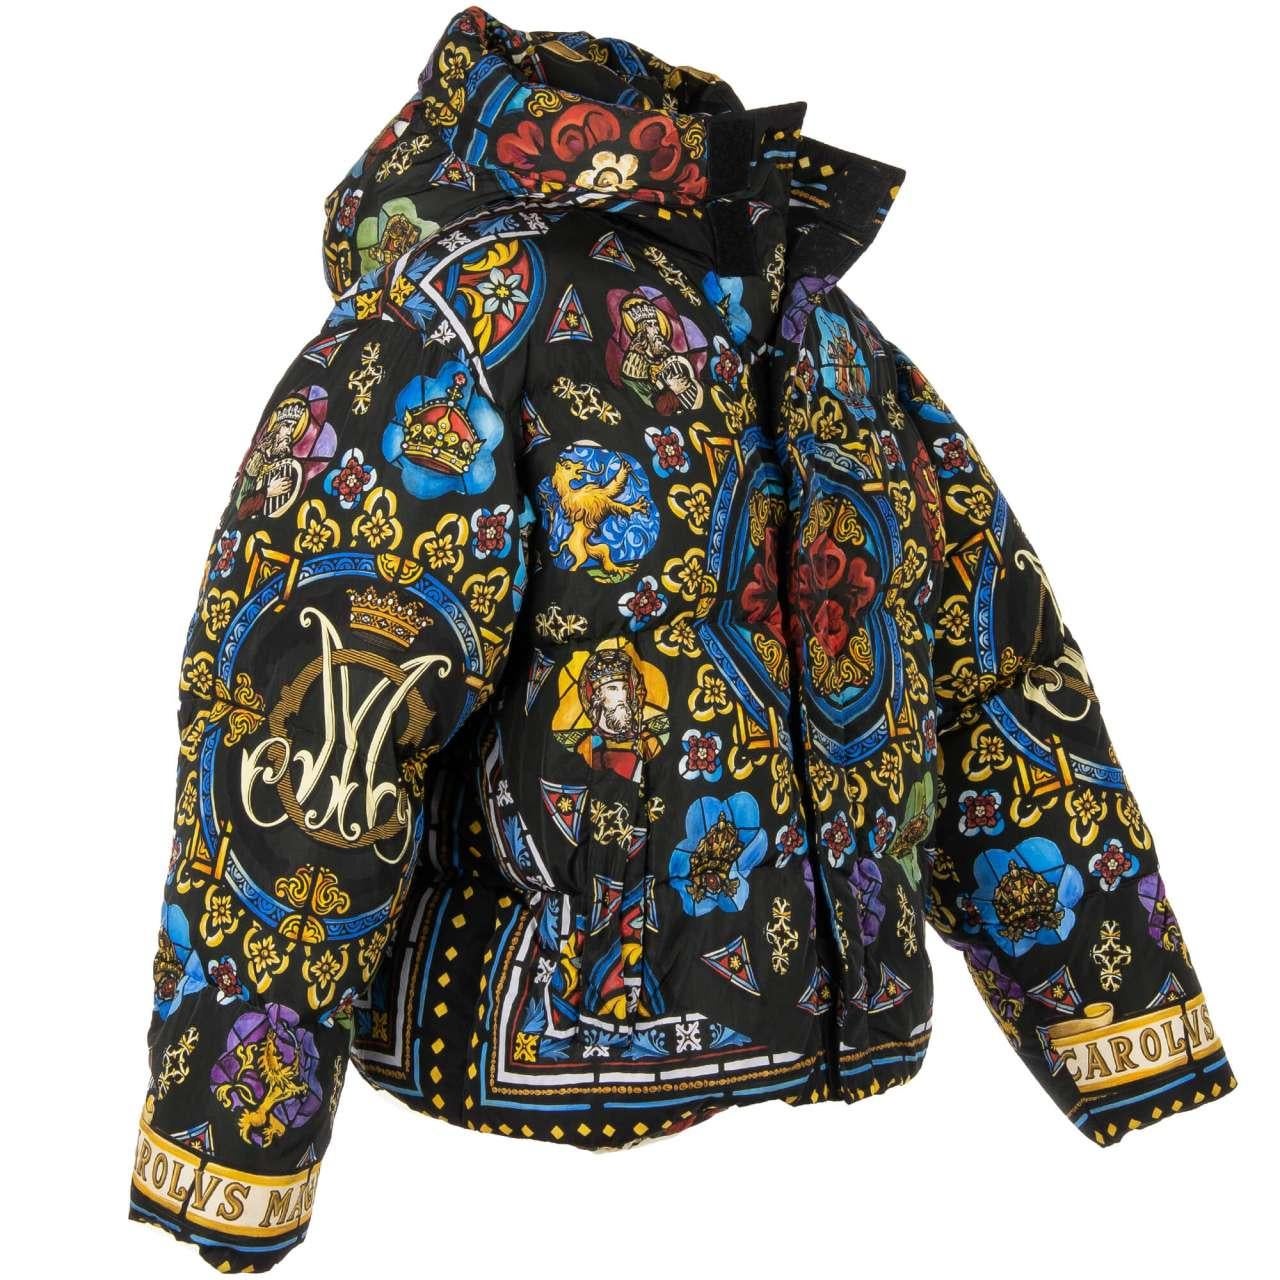 - Wide fit Carolus Magnus design printed bomber down jacket with hoody by DOLCE & GABBANA - New with tag - Wide Fit - fits 1-2 sizes bigger - MADE IN ITALY - Model: G9QX5T-HHMX6-HH82C - Material: 100% Nylon - Lining: 100% Polyester - Stuffing: 75%